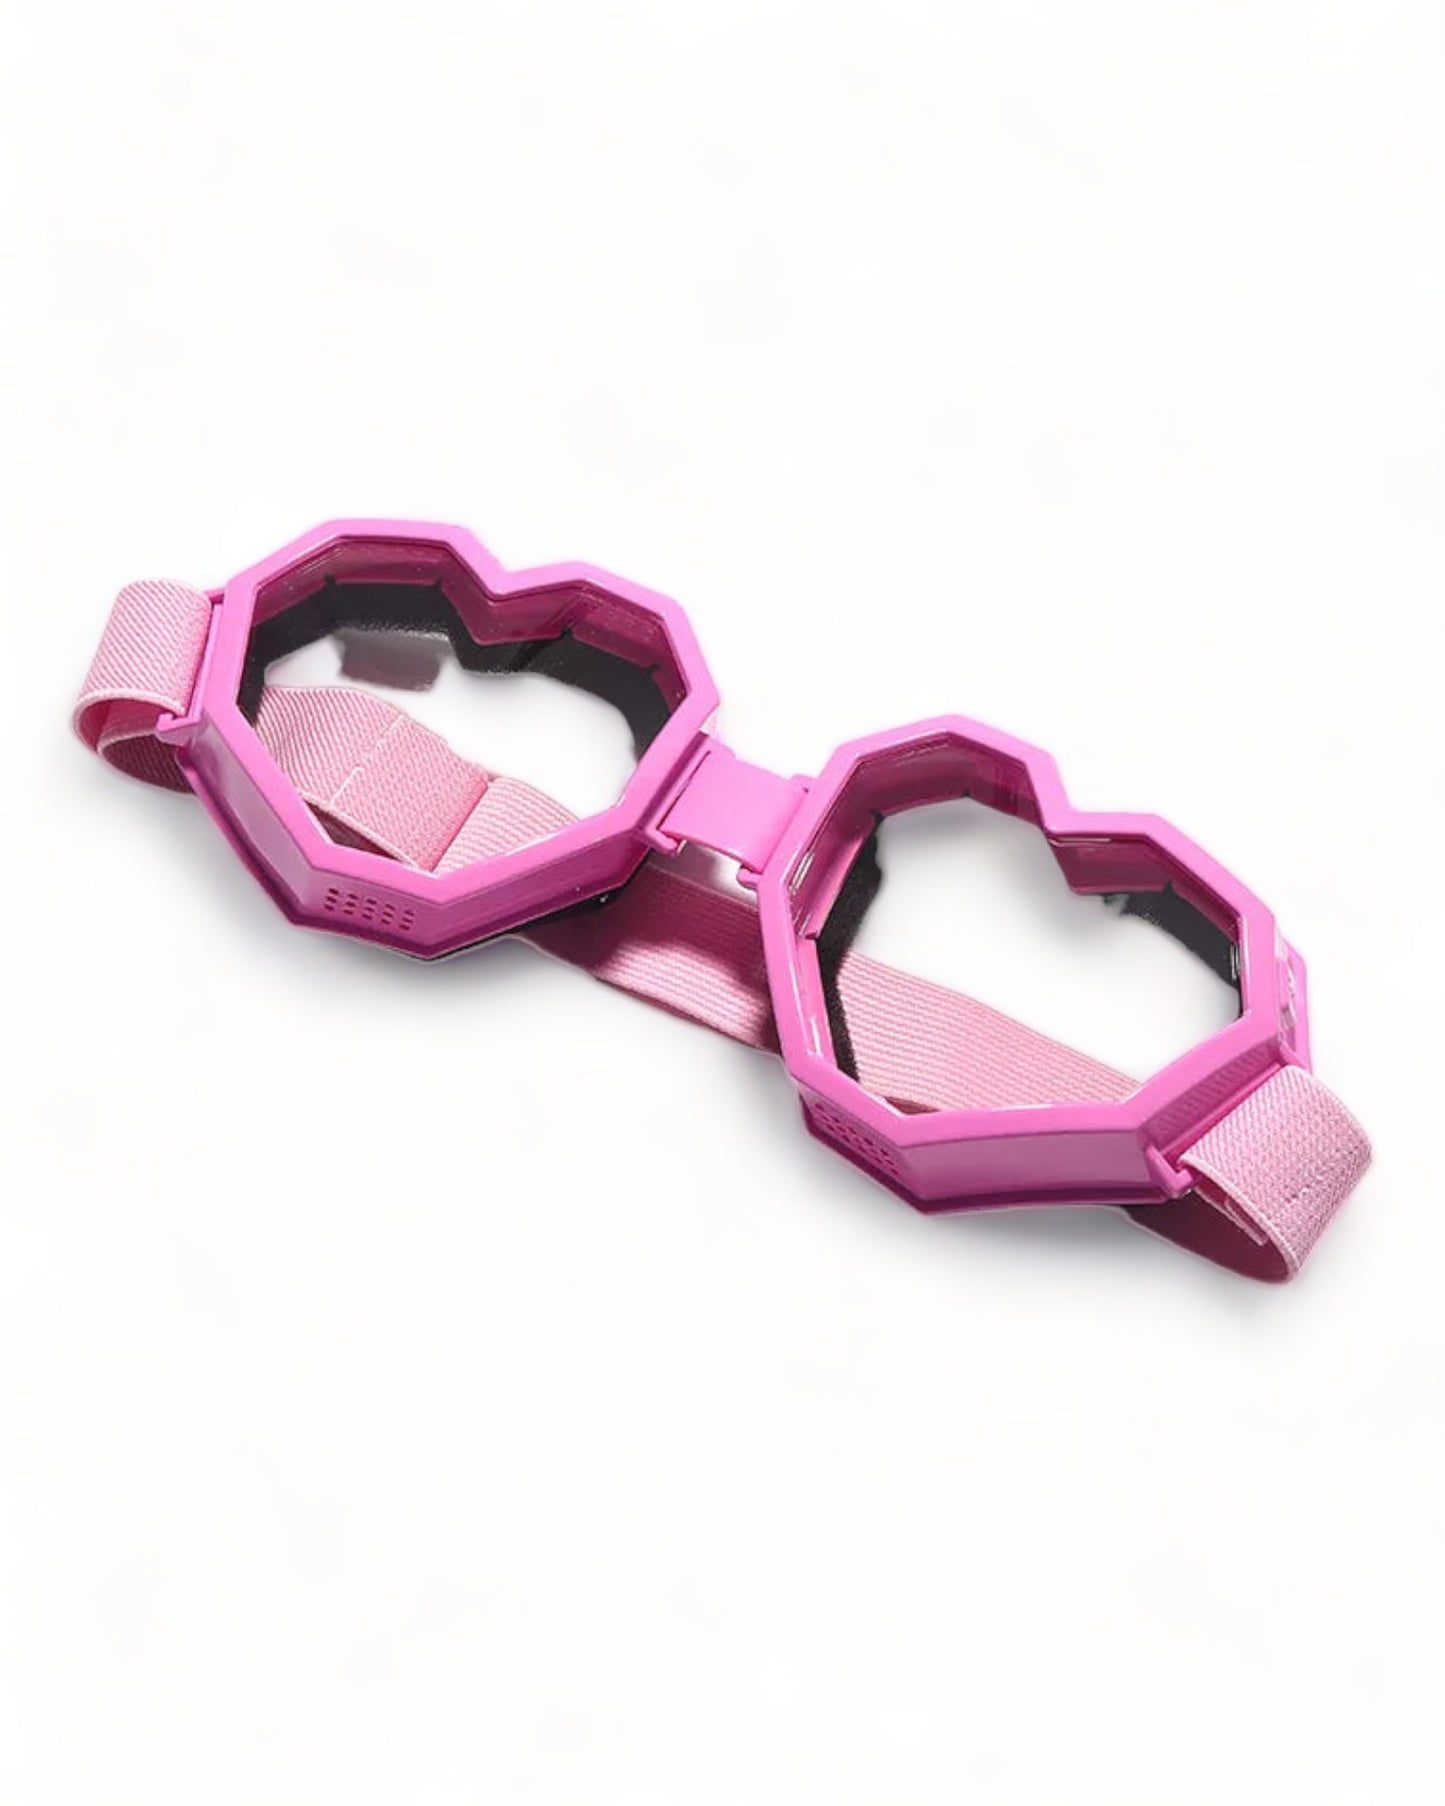 pink Heart Shaped Goggle Sunglasses Steampunk Cyberpunk Pink crystals Burning man Festival Rave